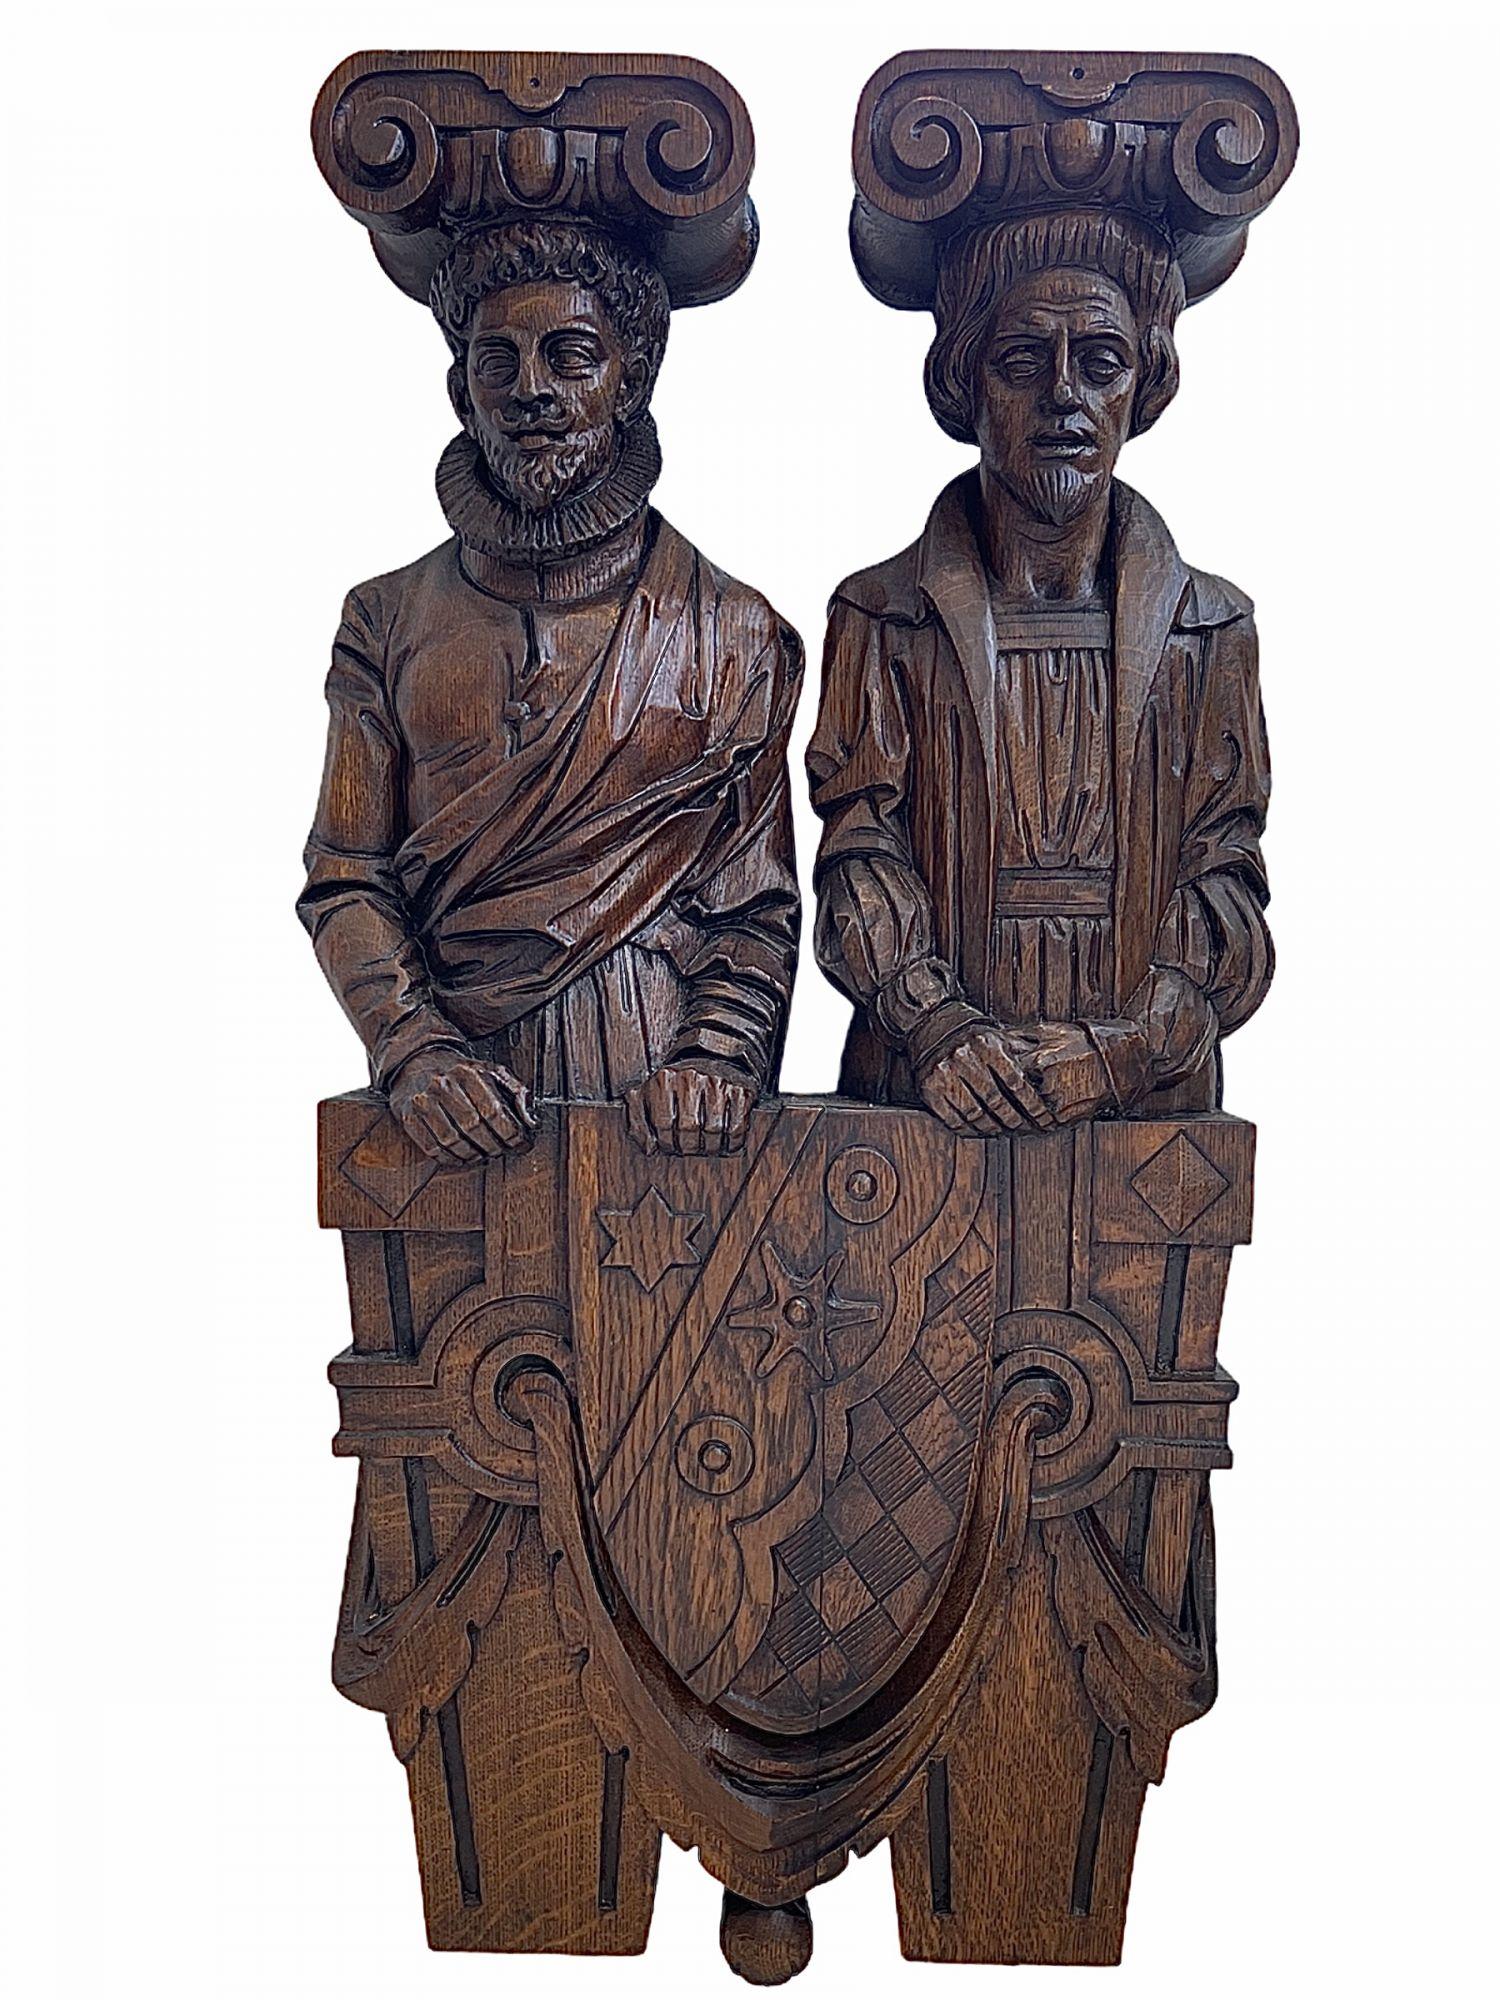 These two carved wood pieces are of the finest quality. They were part of a very important German library room in an early 19th century Schlösser.